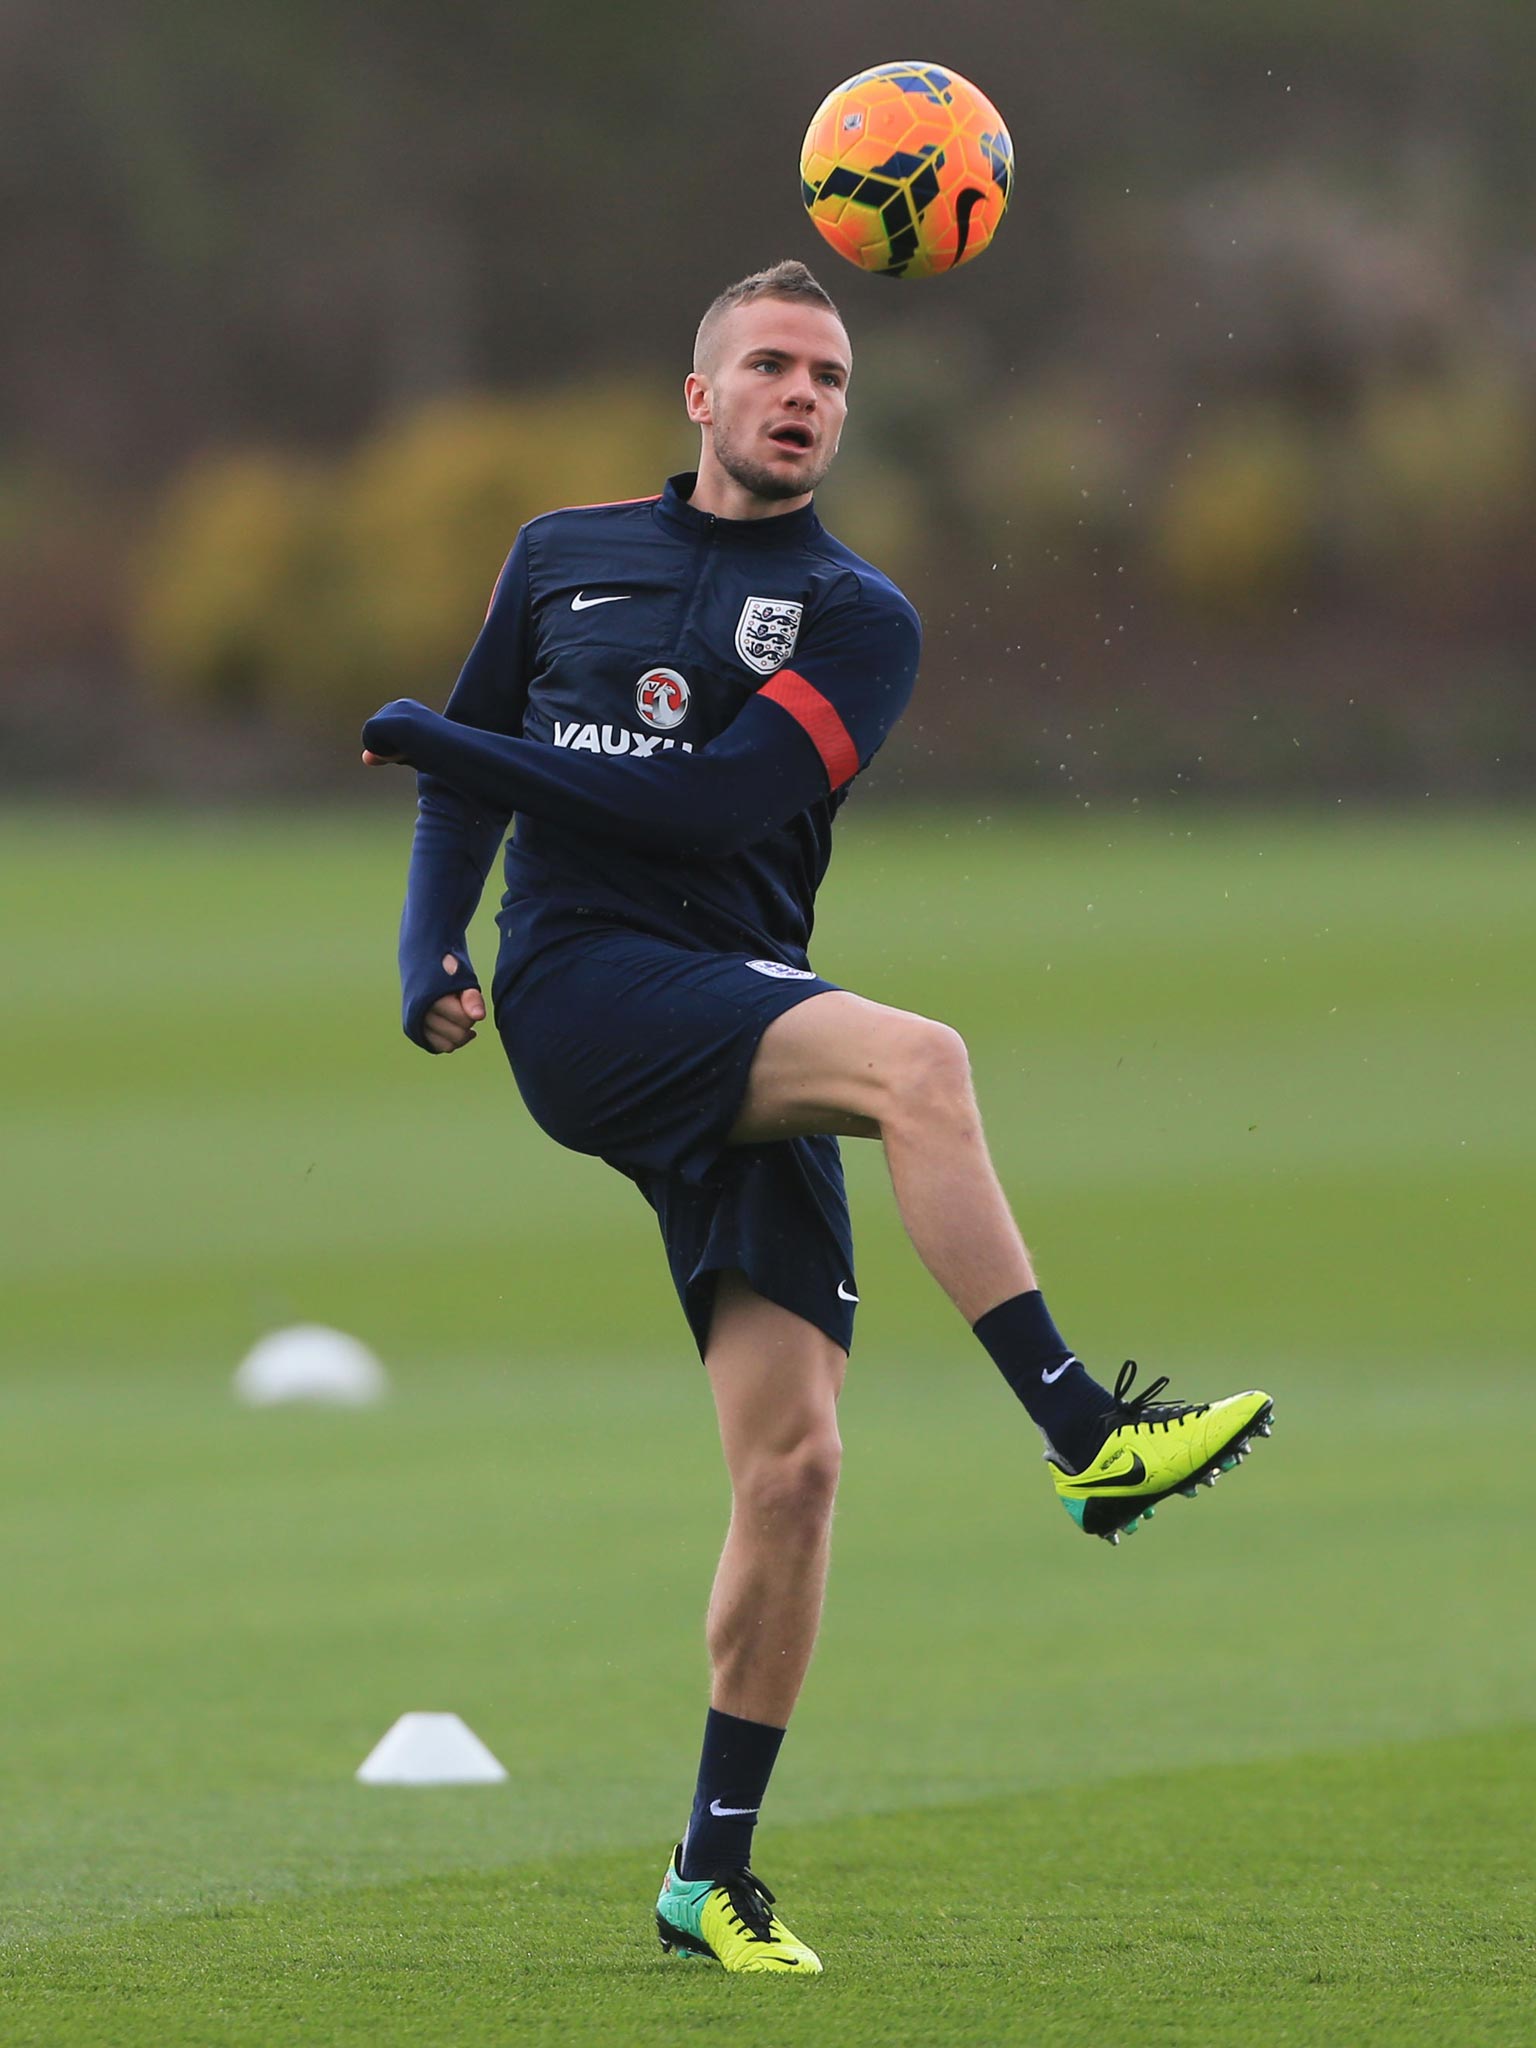 Tom Cleverley is ‘part of a new generation of outstanding talent’, says Roberto Martinez